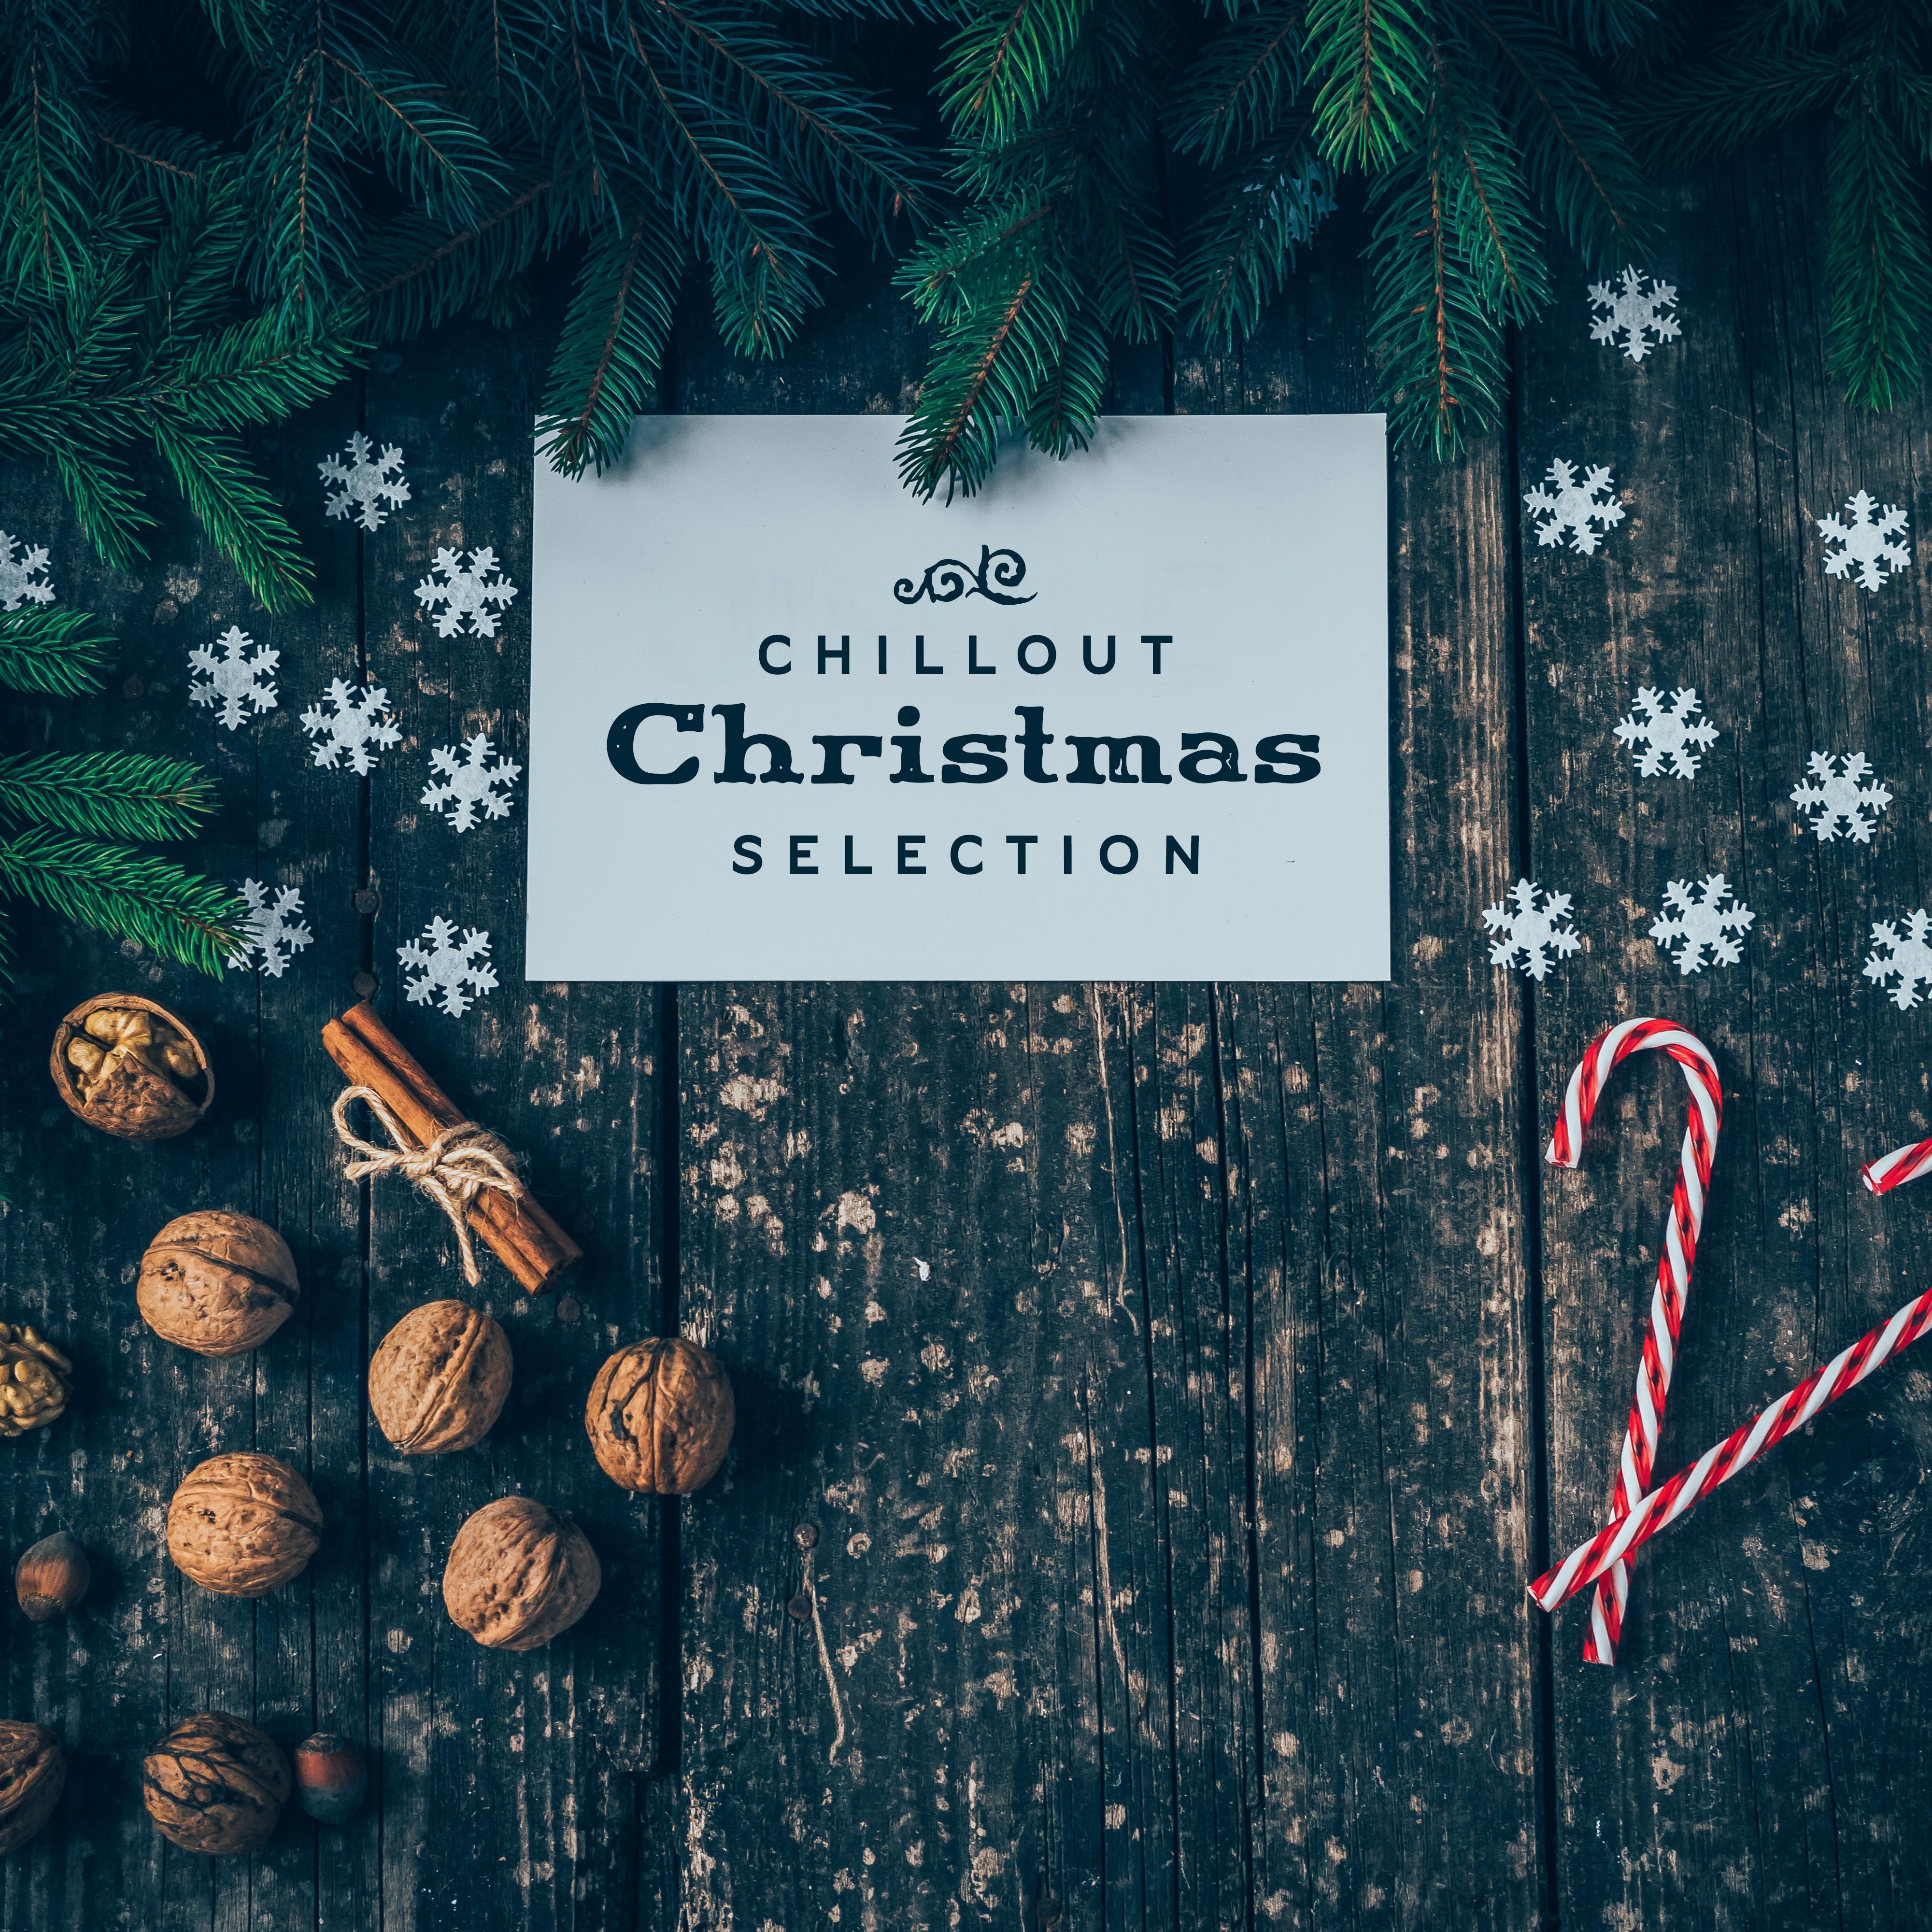 Chillout Christmas Selection